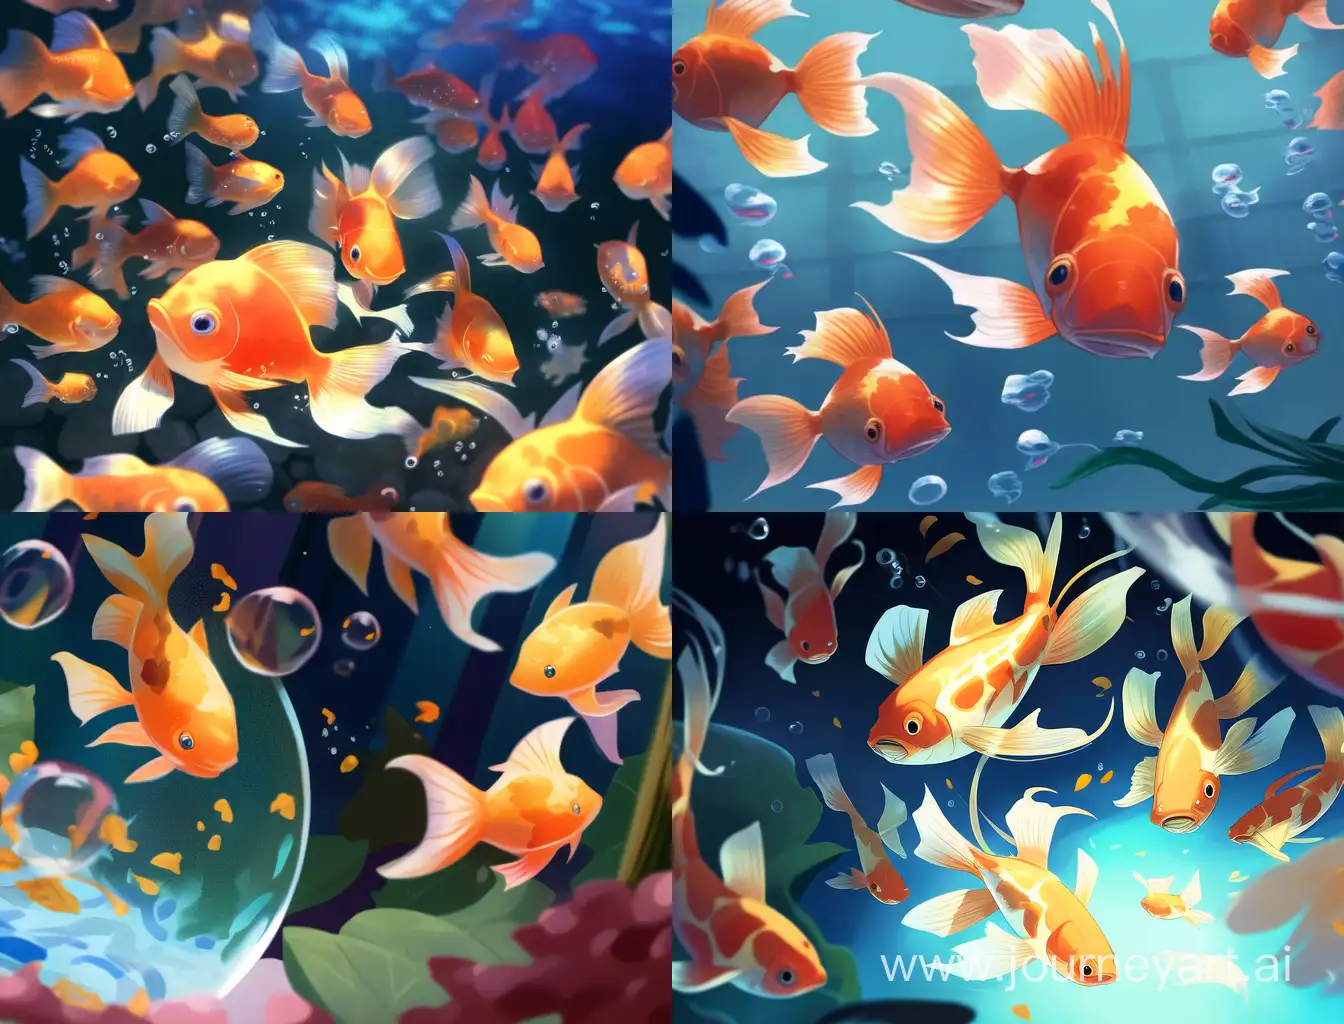 The goldfish turns into numbers